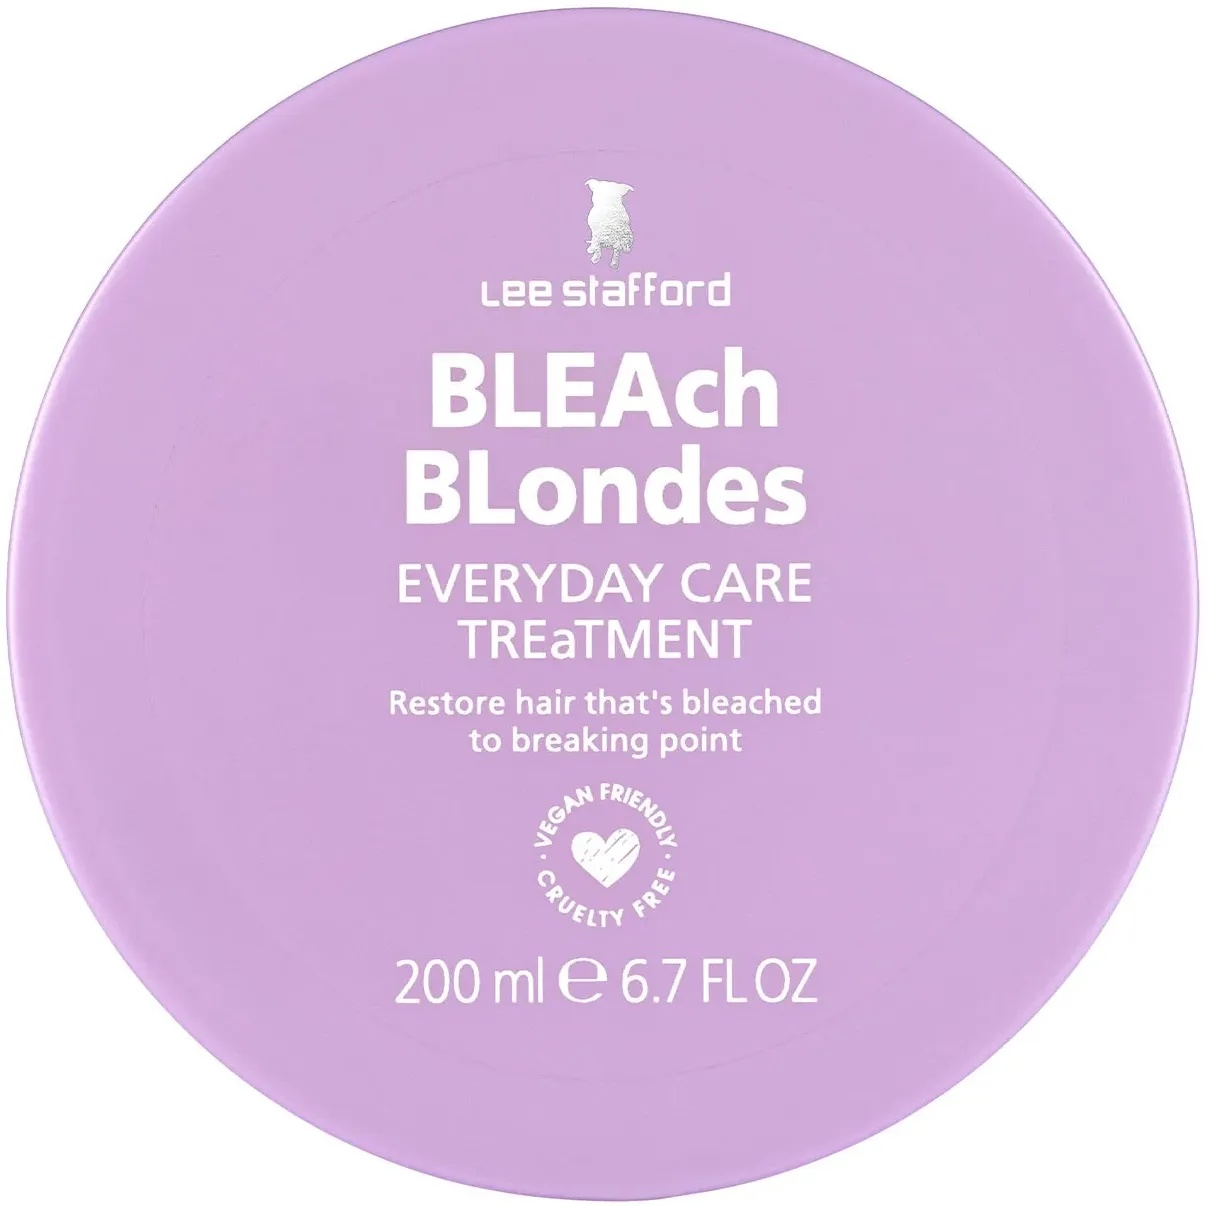 Lee Stafford Bleach Blondes Everyday Care Treatment